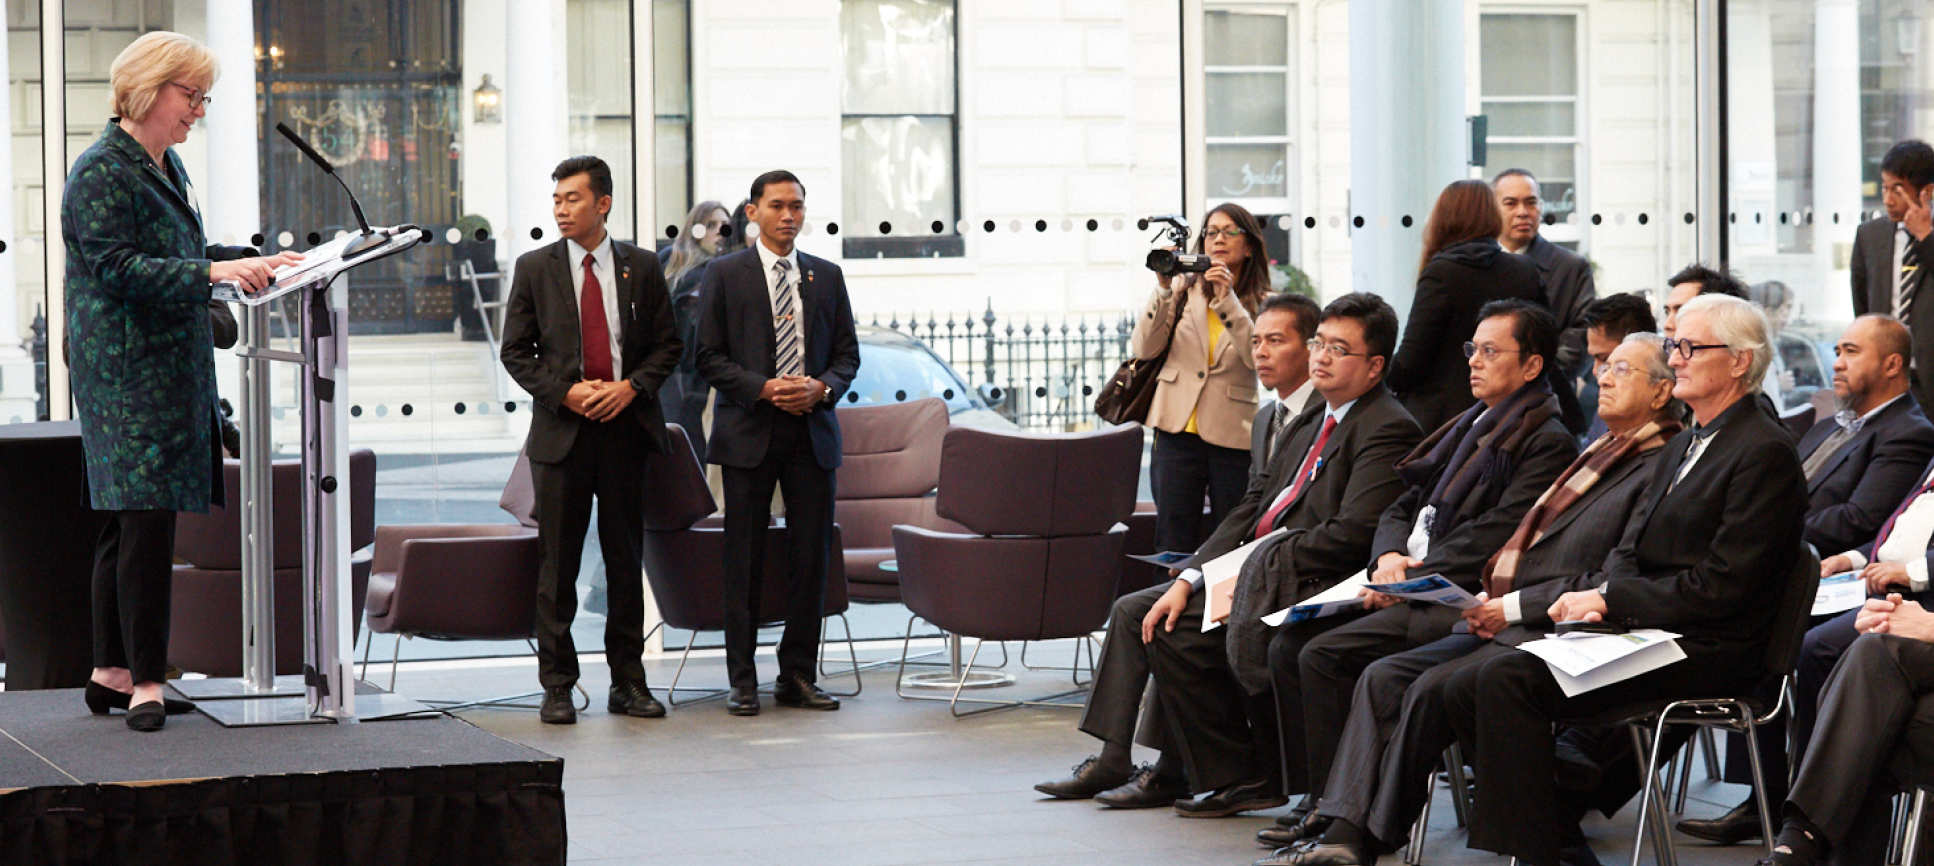 Professor Maggie Dallman told the Prime Minister that Imperial is the UK's most international university